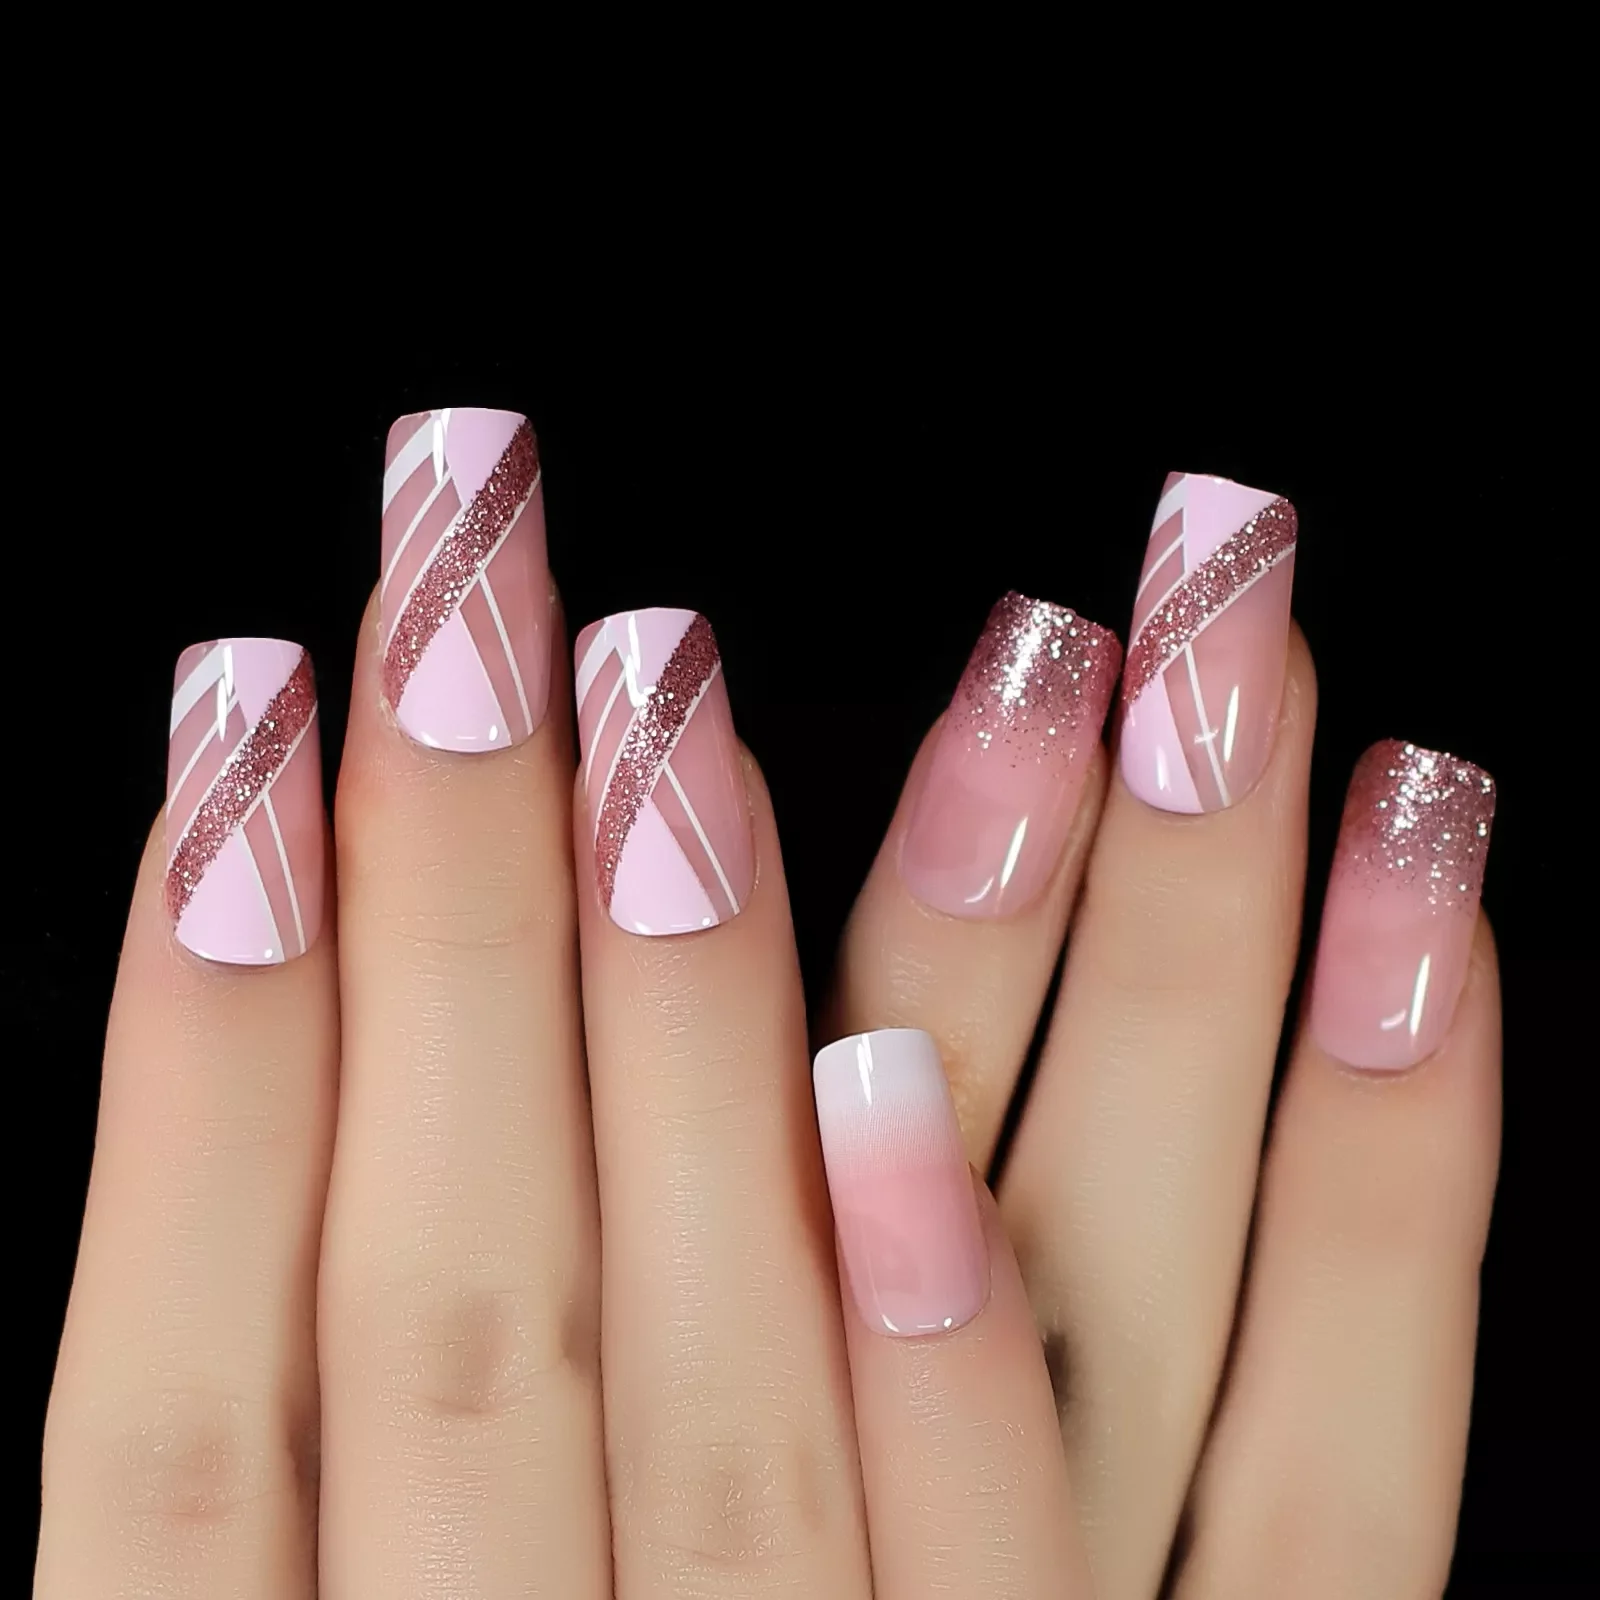 

Medium Square Glitter Nails Art Fingernails Manicure Press On Fake Nails With Designed Pink Line Acrylic Full Cover Tips